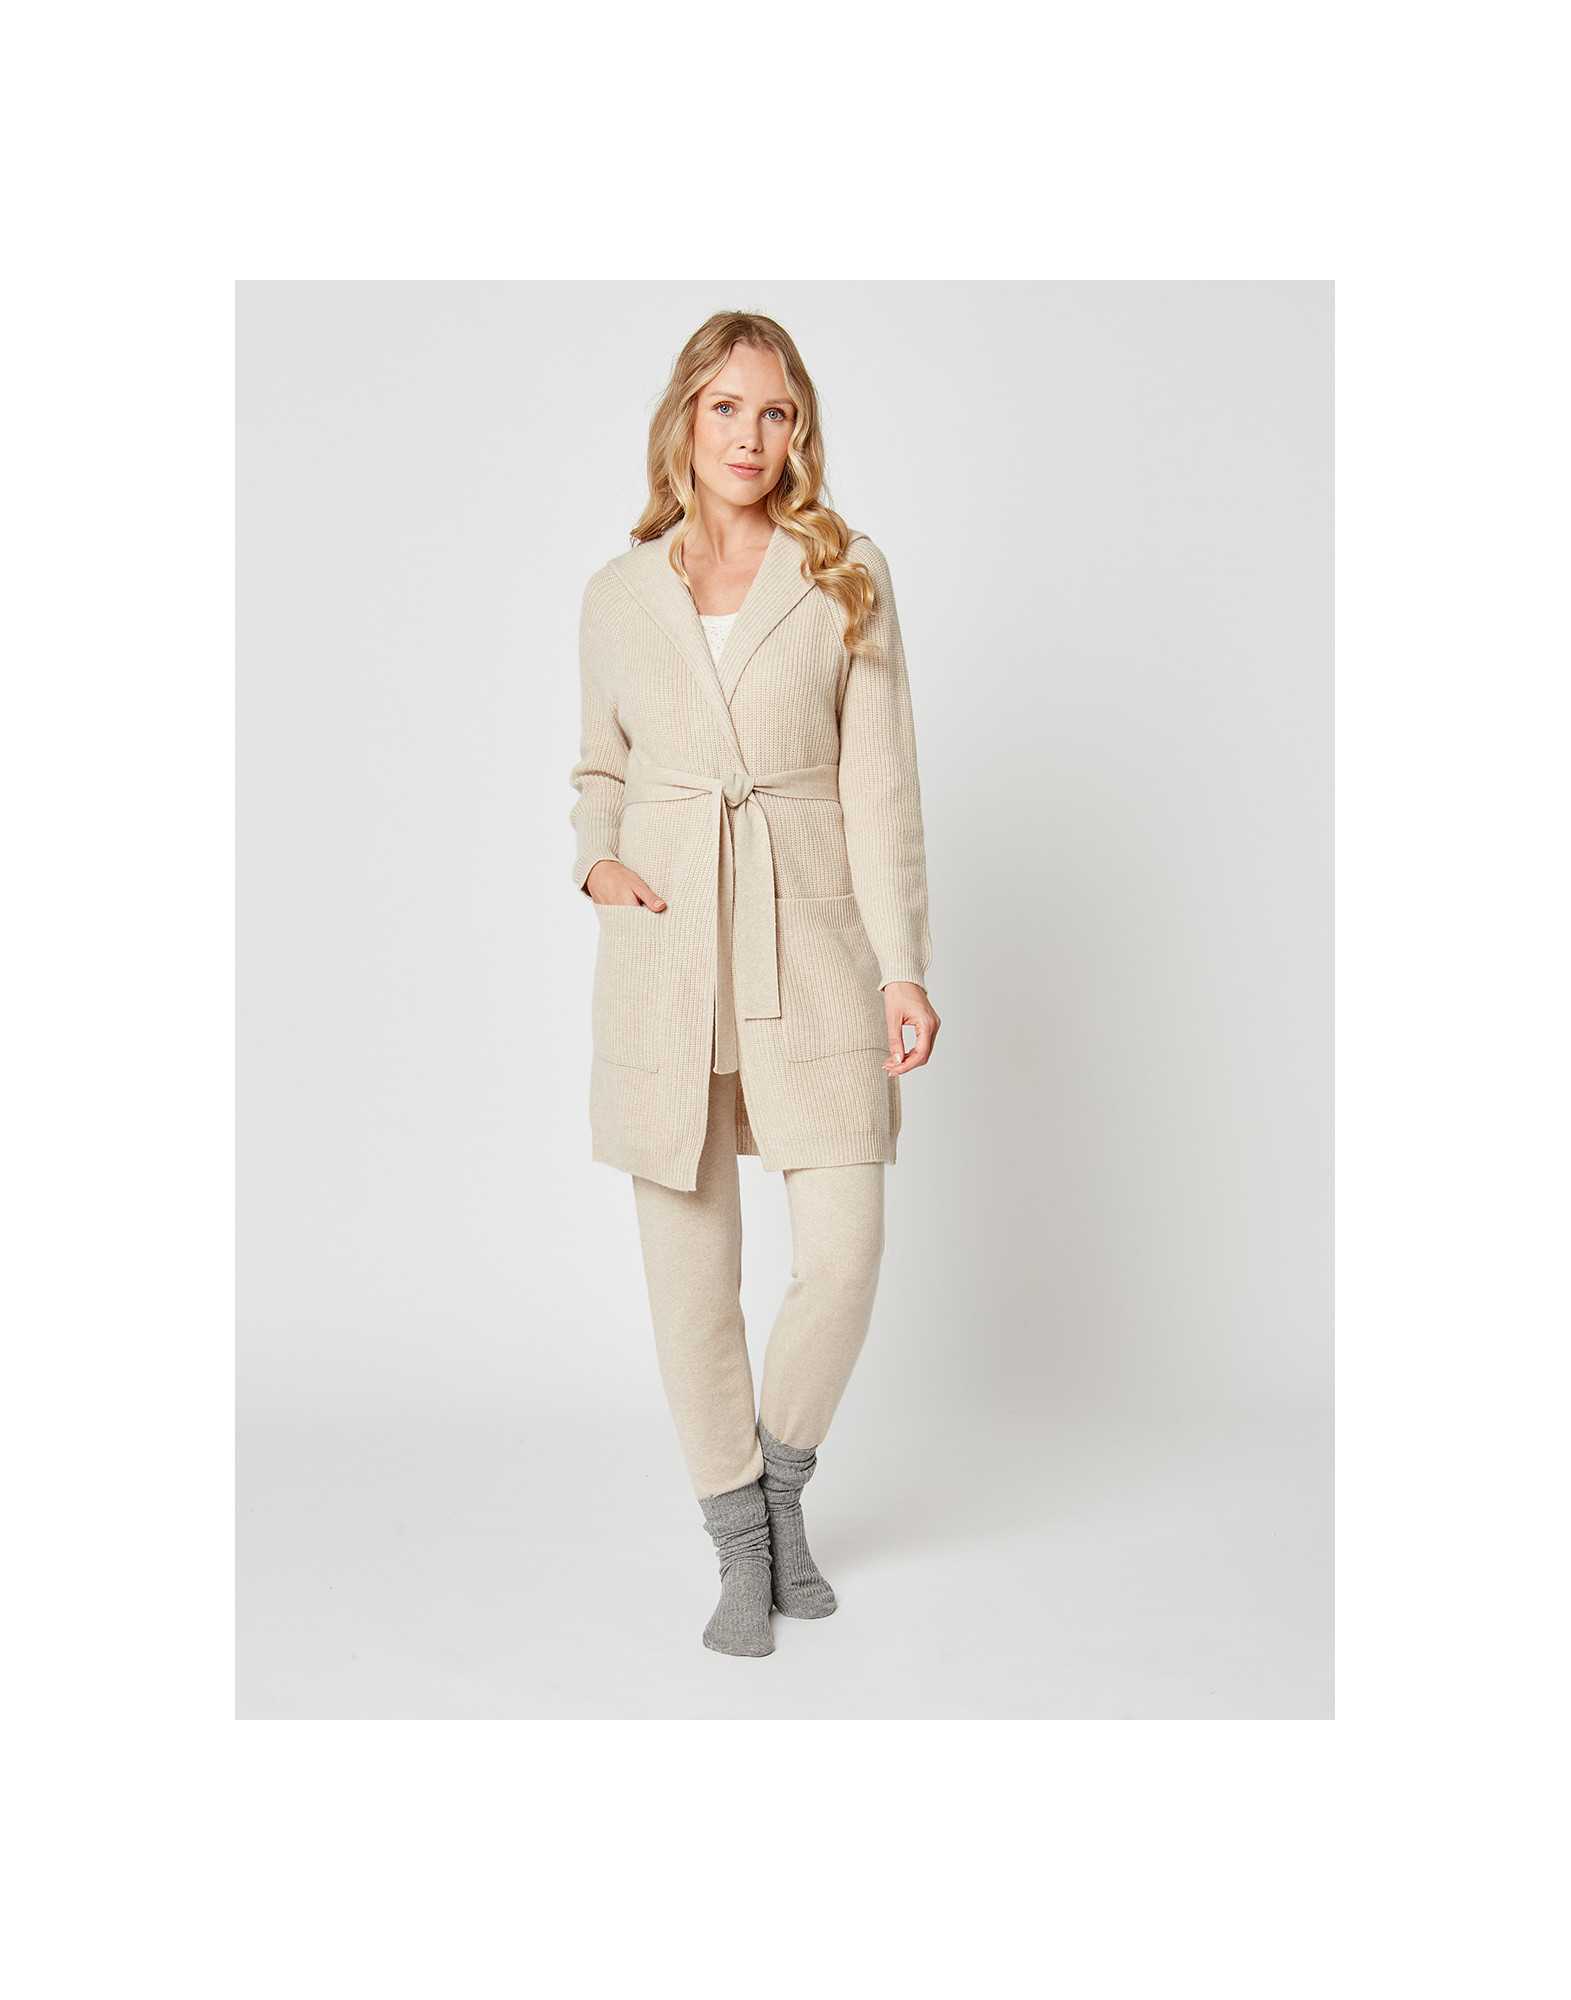 Cashmere bathrobe with shawl collar and soft hood in camel - Lingerie le Chat